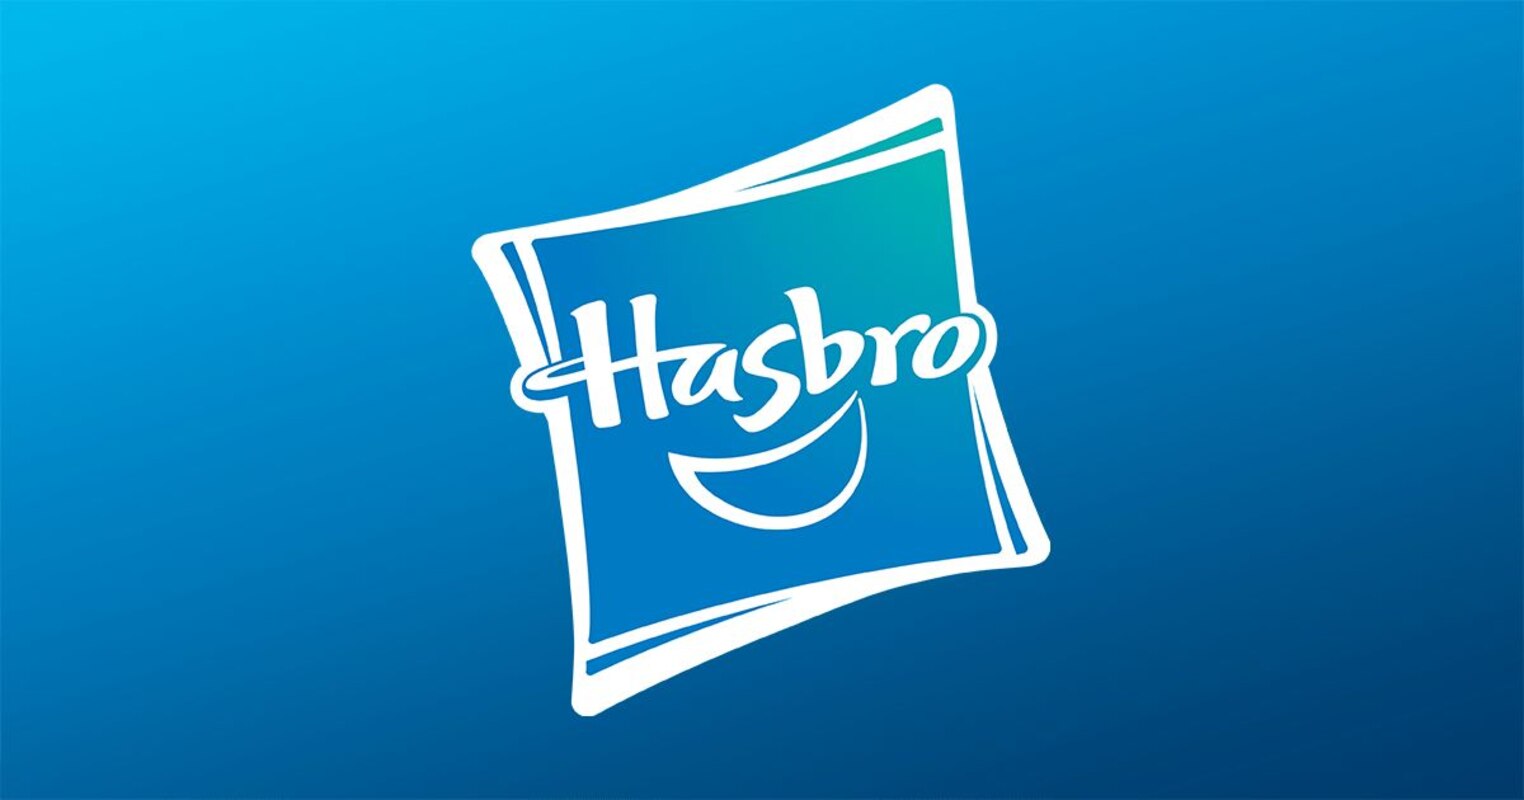  Hasbro Officially Announce Sale of eOne Film & TV Business to Lionsgate